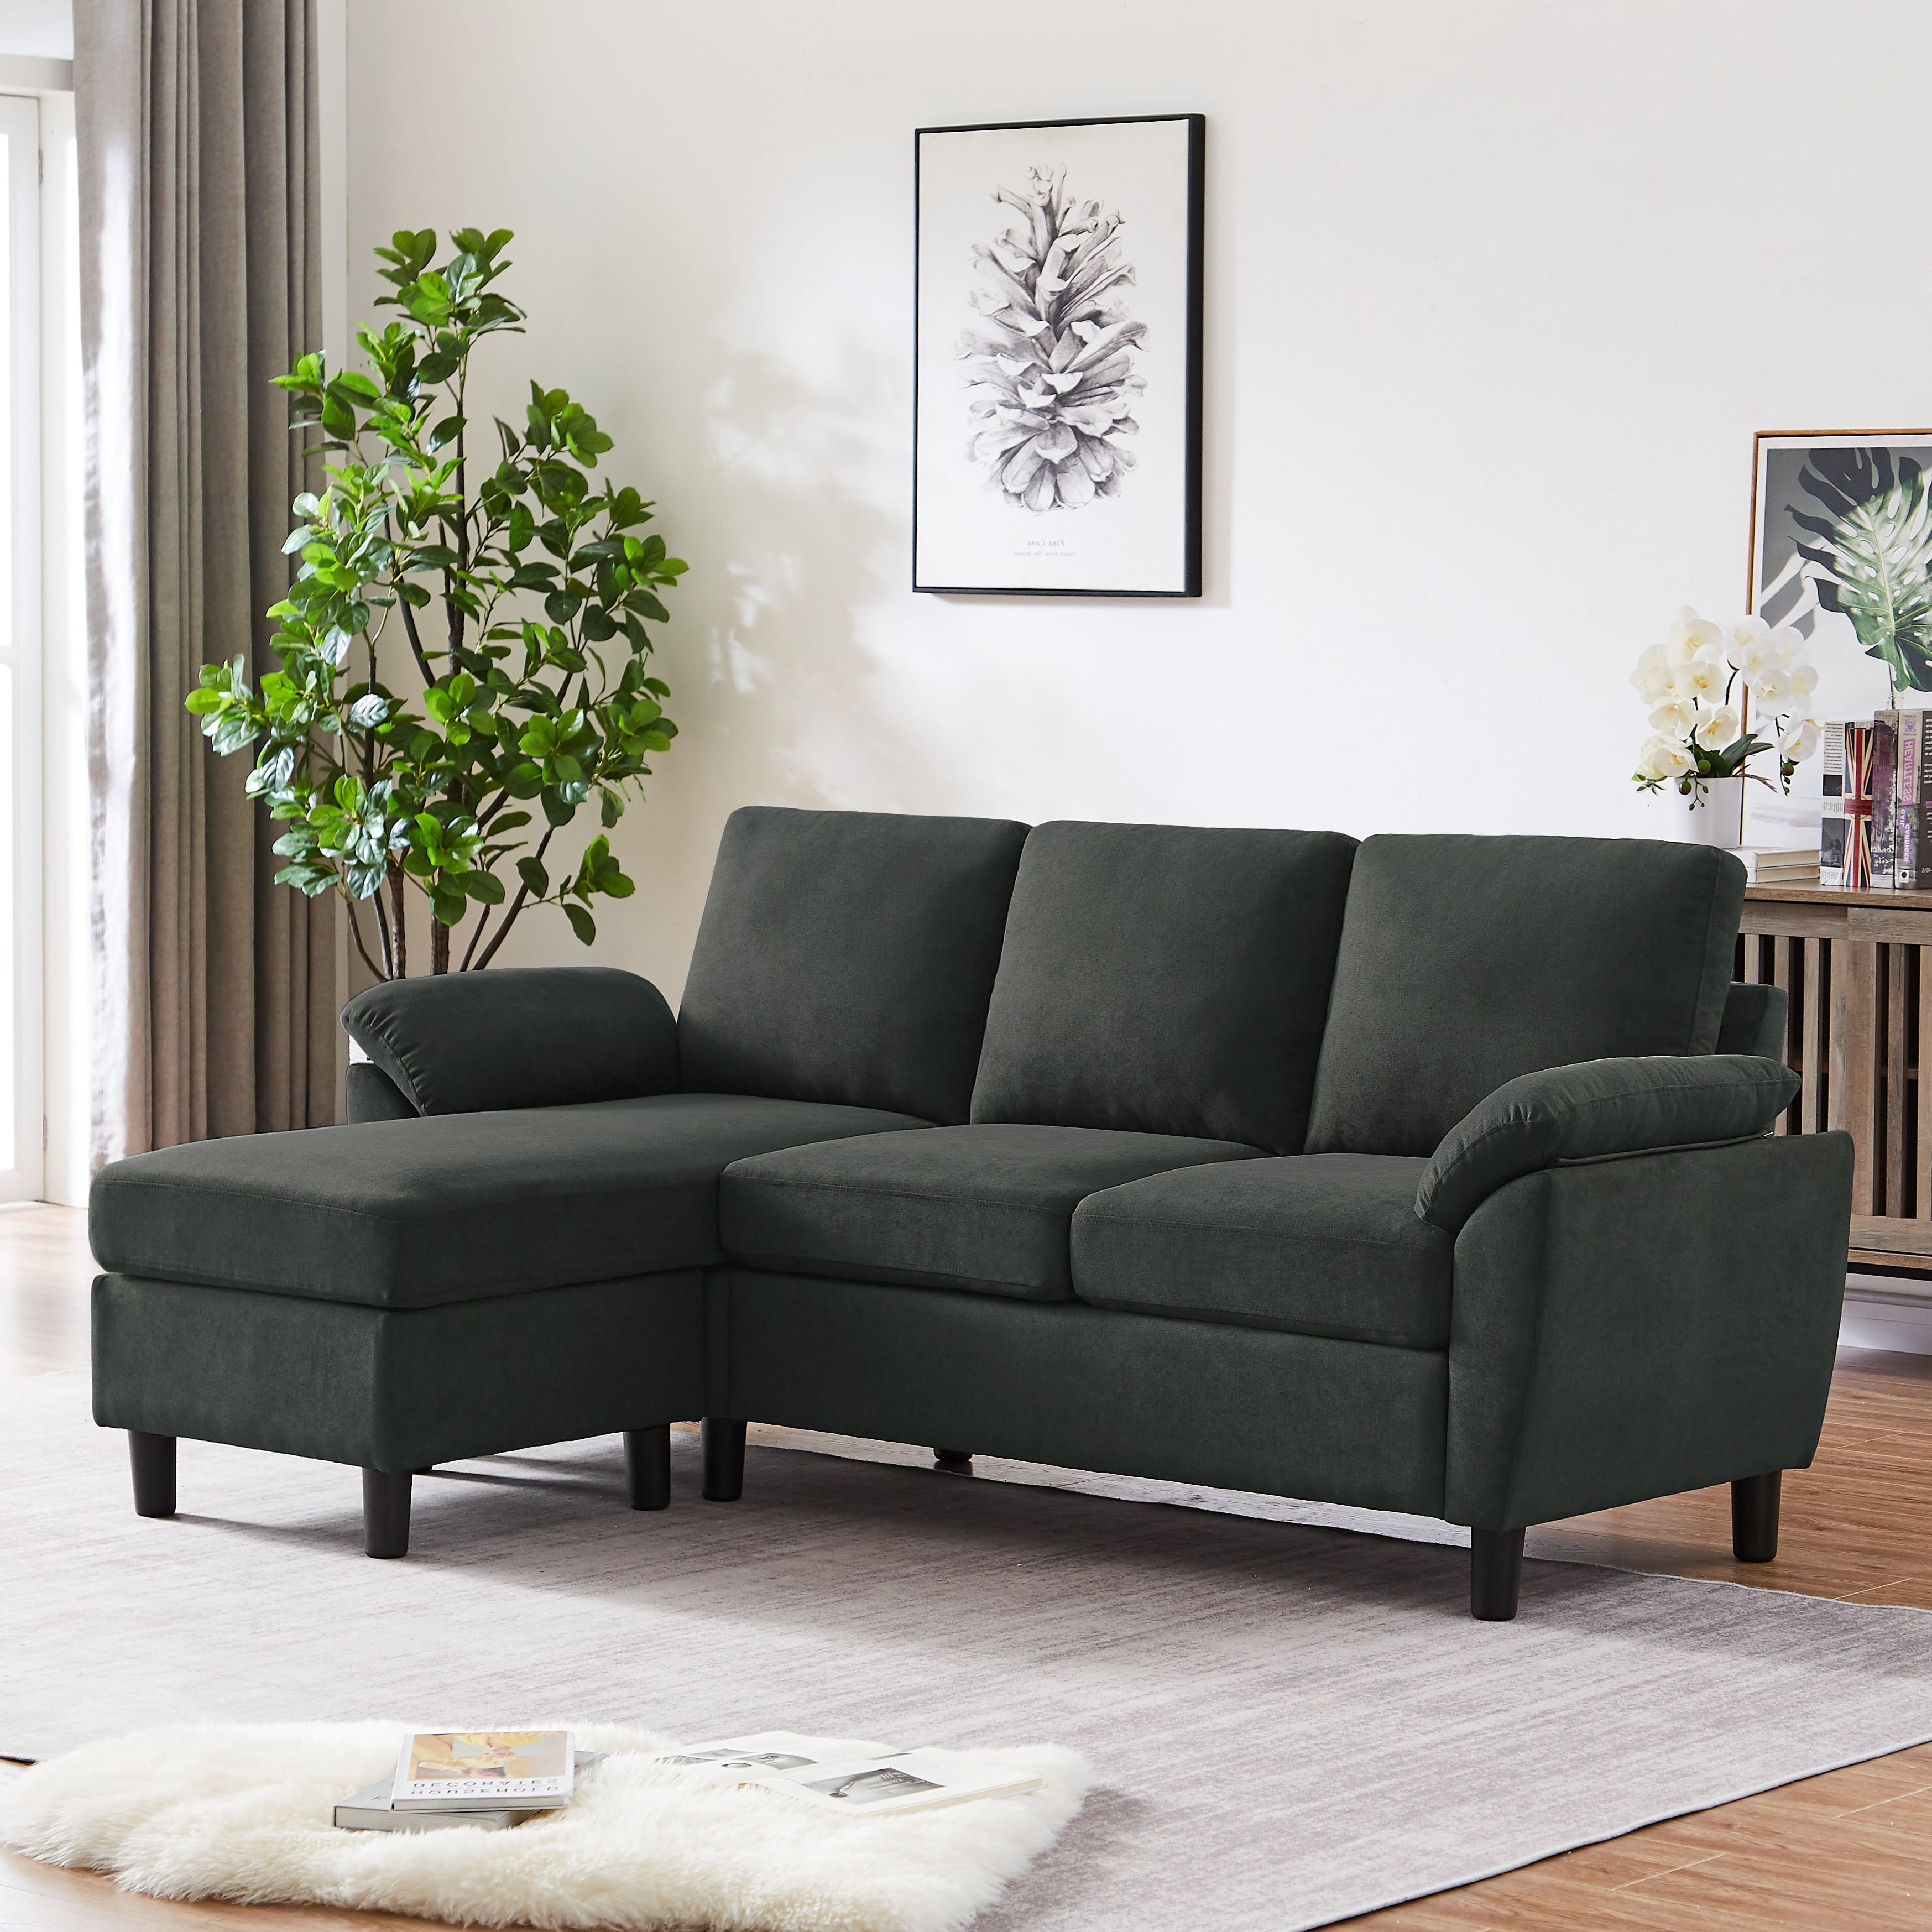 Jarenie Modern Fabric L Shapped Sofa Sectional Couches For Living Room Convertible  Sofa With Matching Chaise For Office, Apartment, Studio – Walmart Pertaining To Convertible Sofa With Matching Chaise (View 2 of 20)